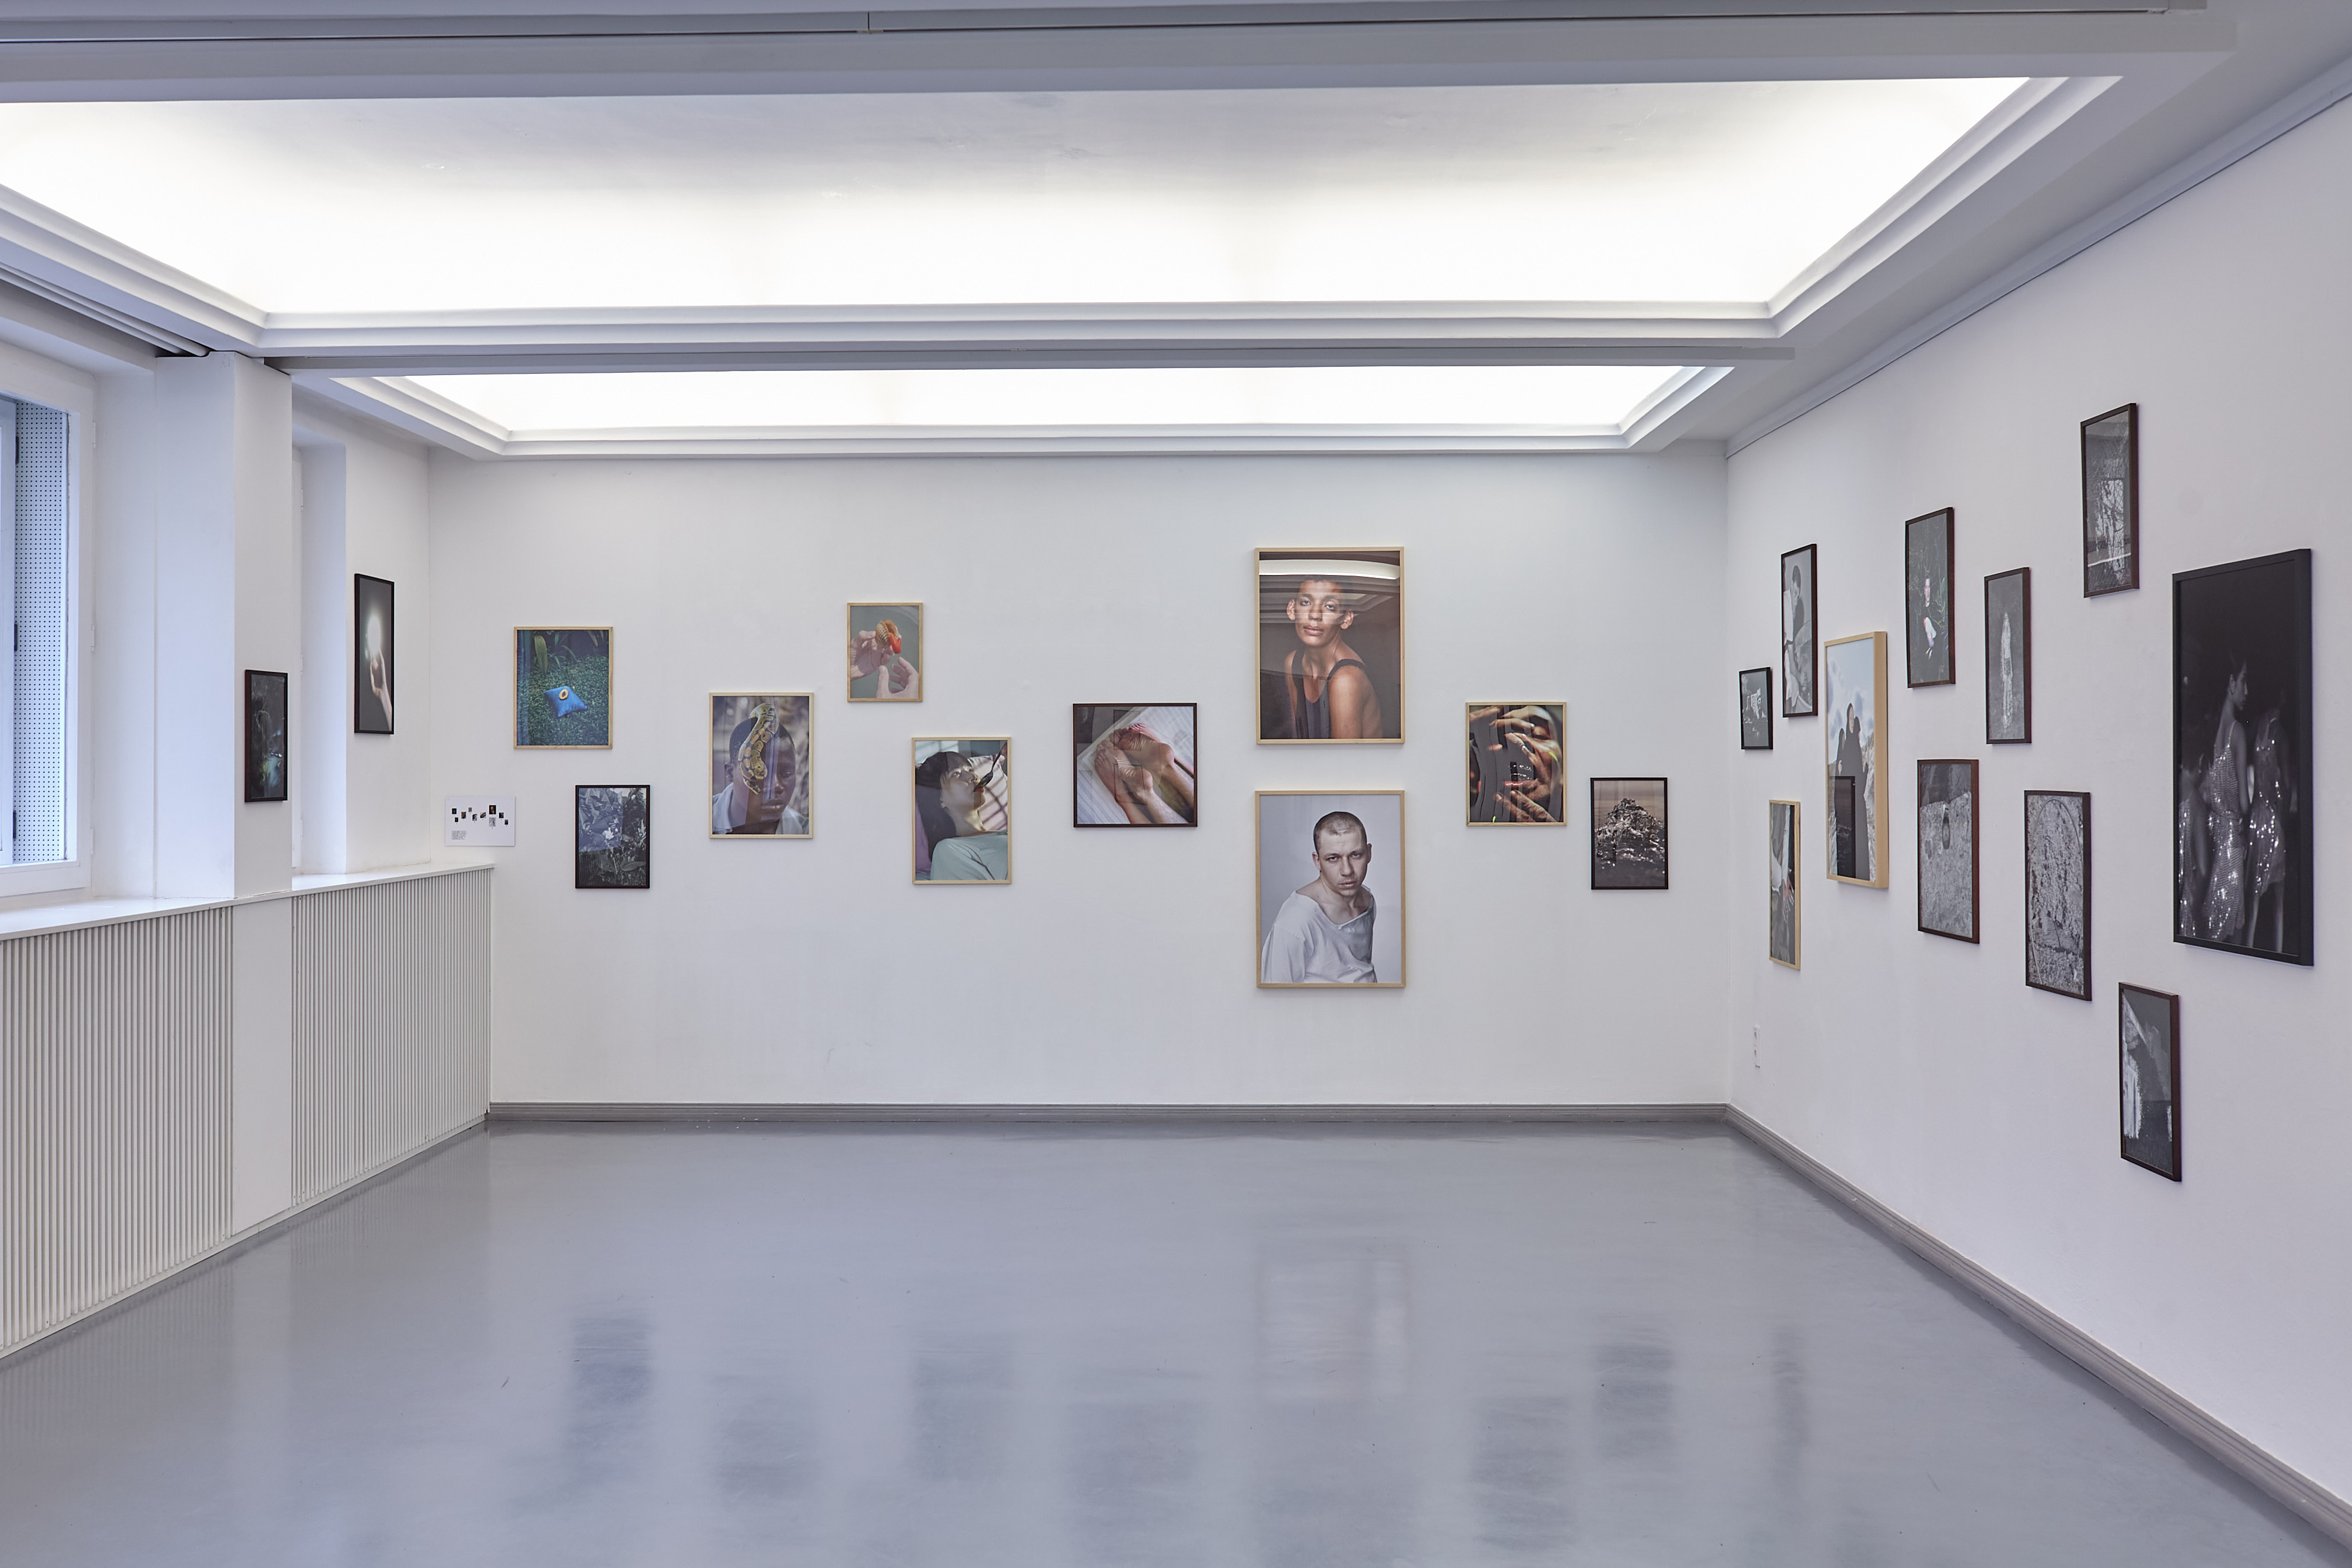 Installation view of the PEP (Photographic Exploration Project) New Talents 2021 Exhibition at Kommunale Galerie Berlin